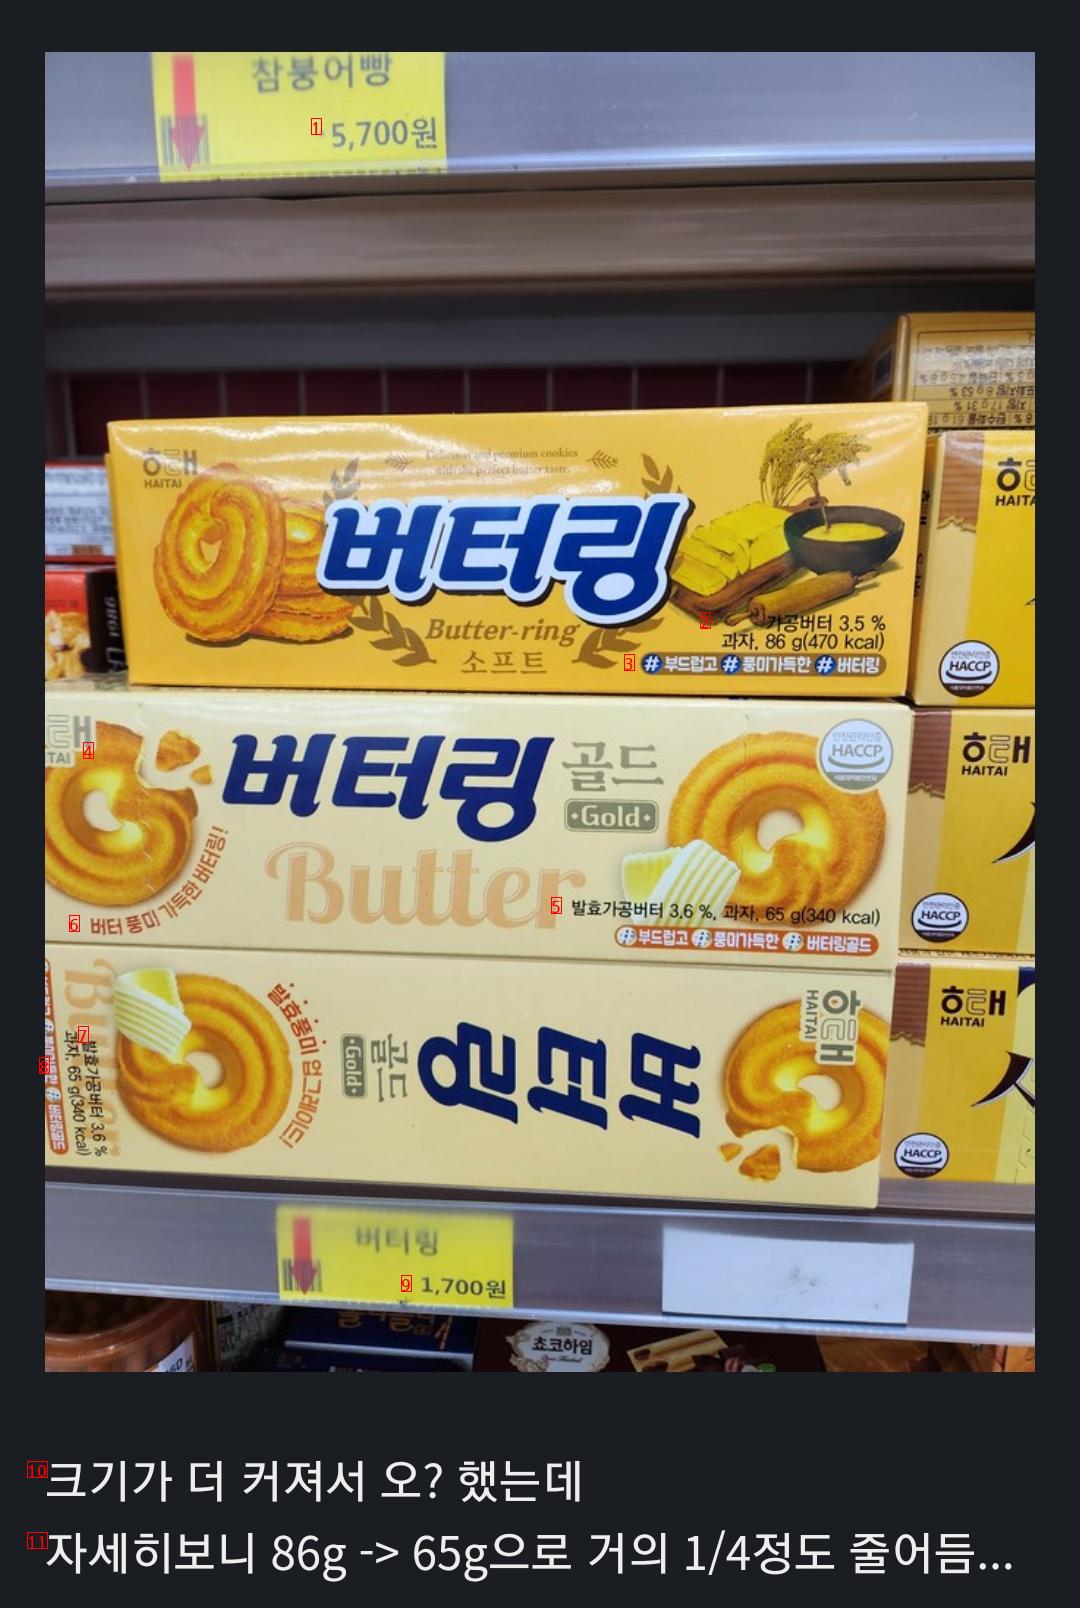 What's up with the butter ring snack